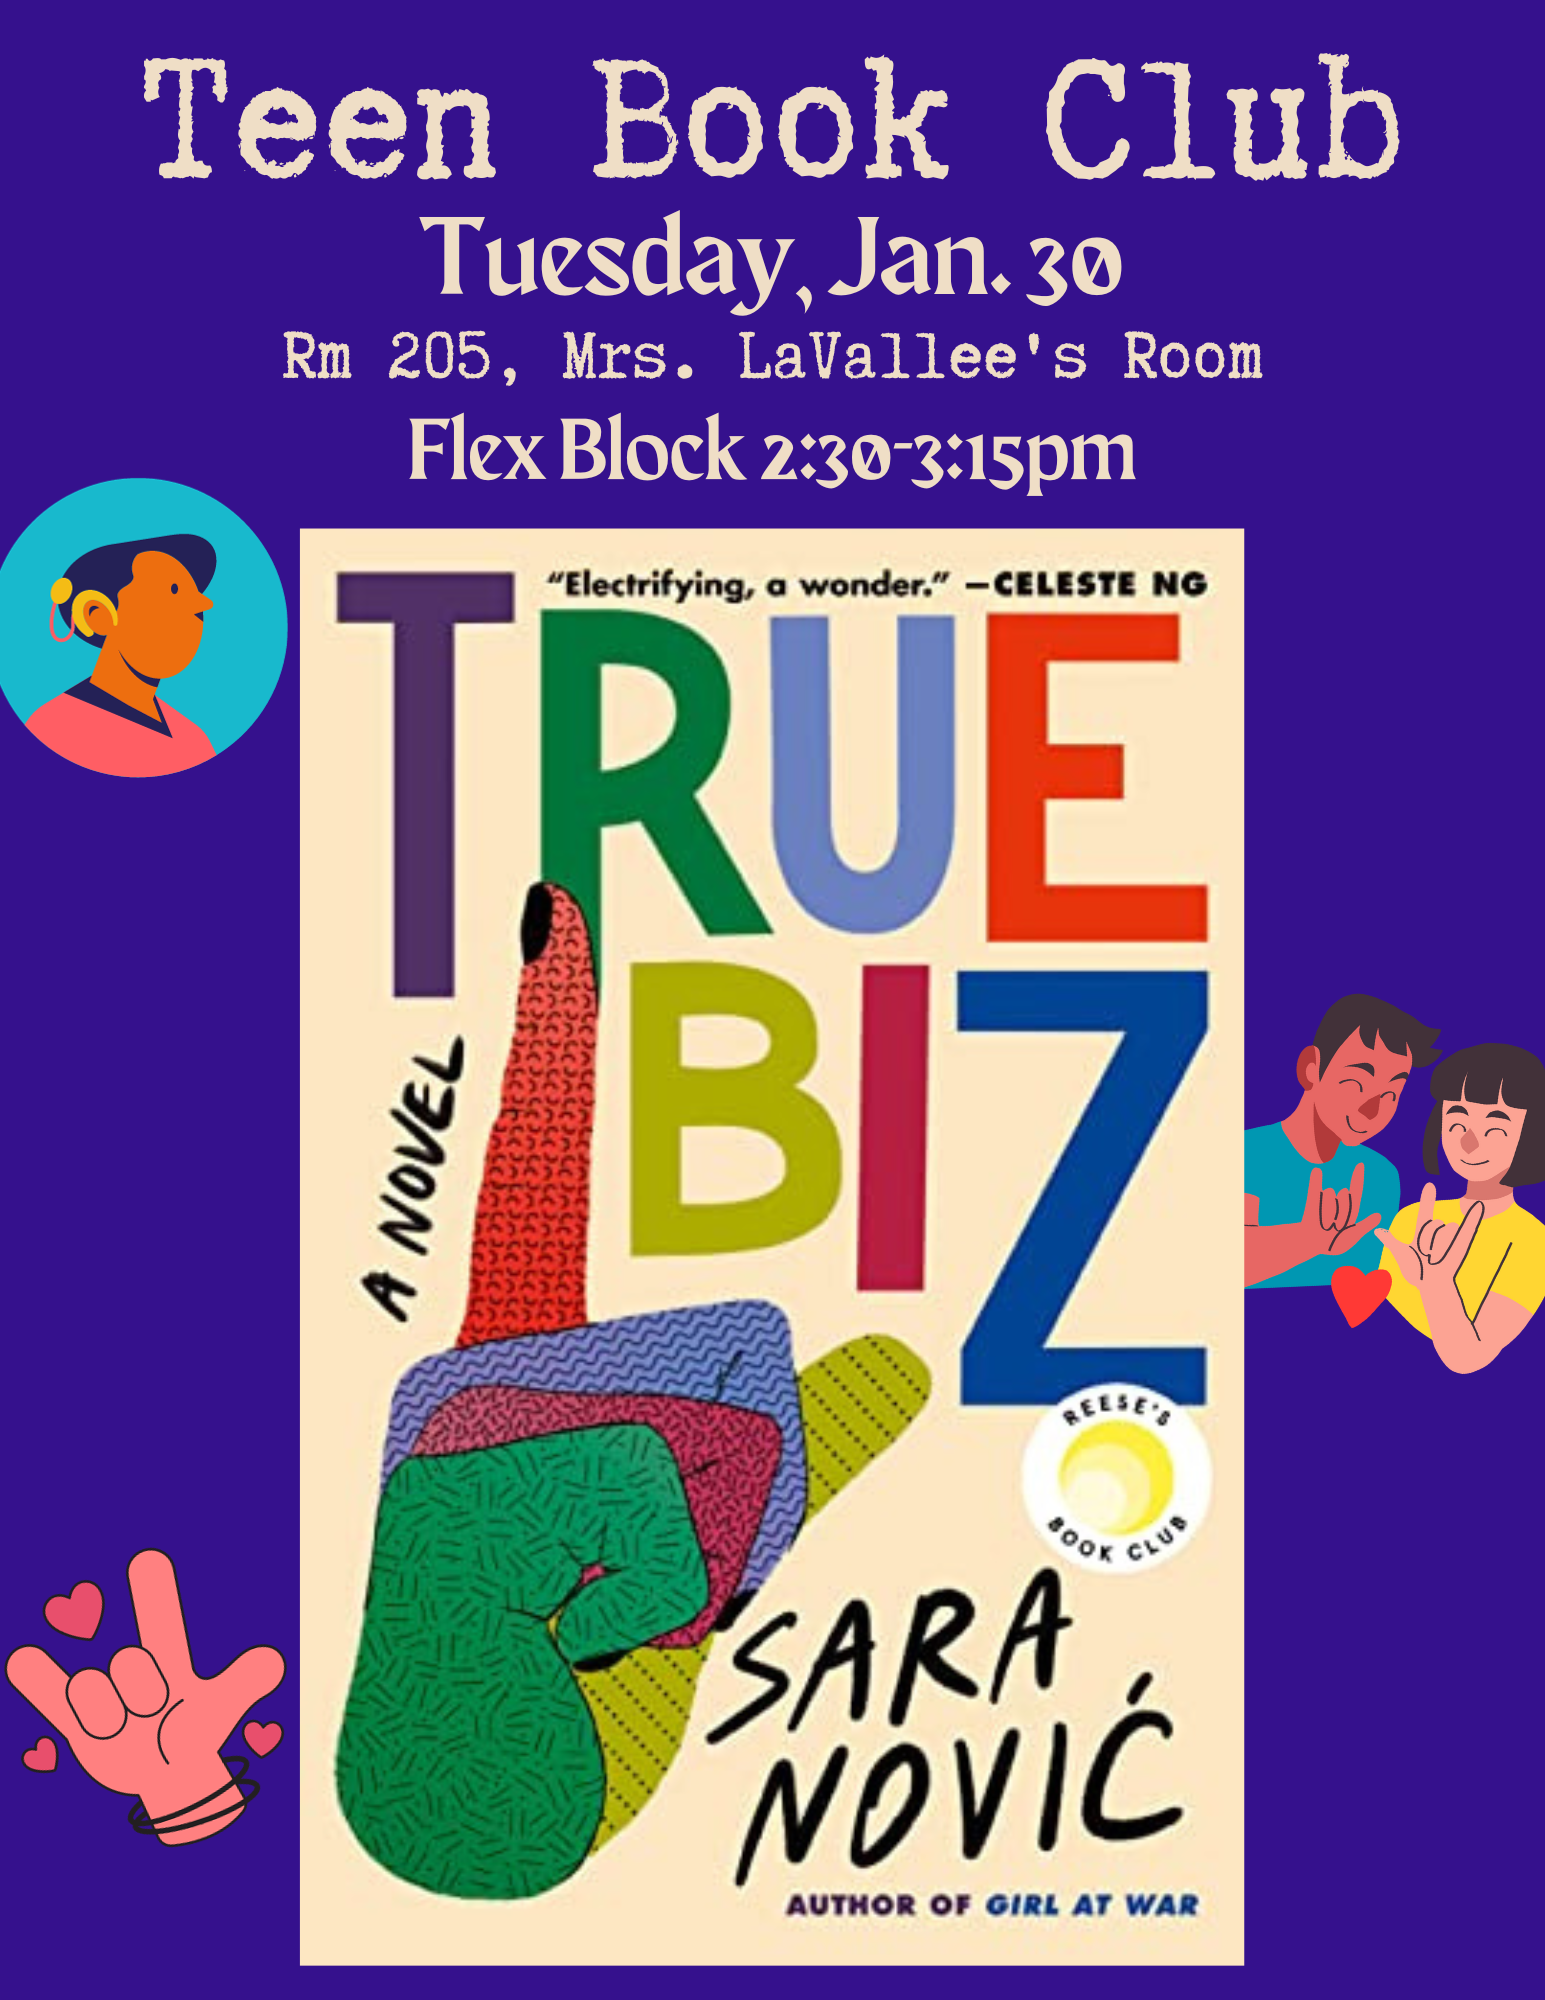 An image of the book cover for "True Biz" by Sara Novic, with the date, time, and location of book club, which is Tuesday, January 30th, 2024, room 205, Mrs. LaVallee's Room, Flex Block 2:30-3:15pm